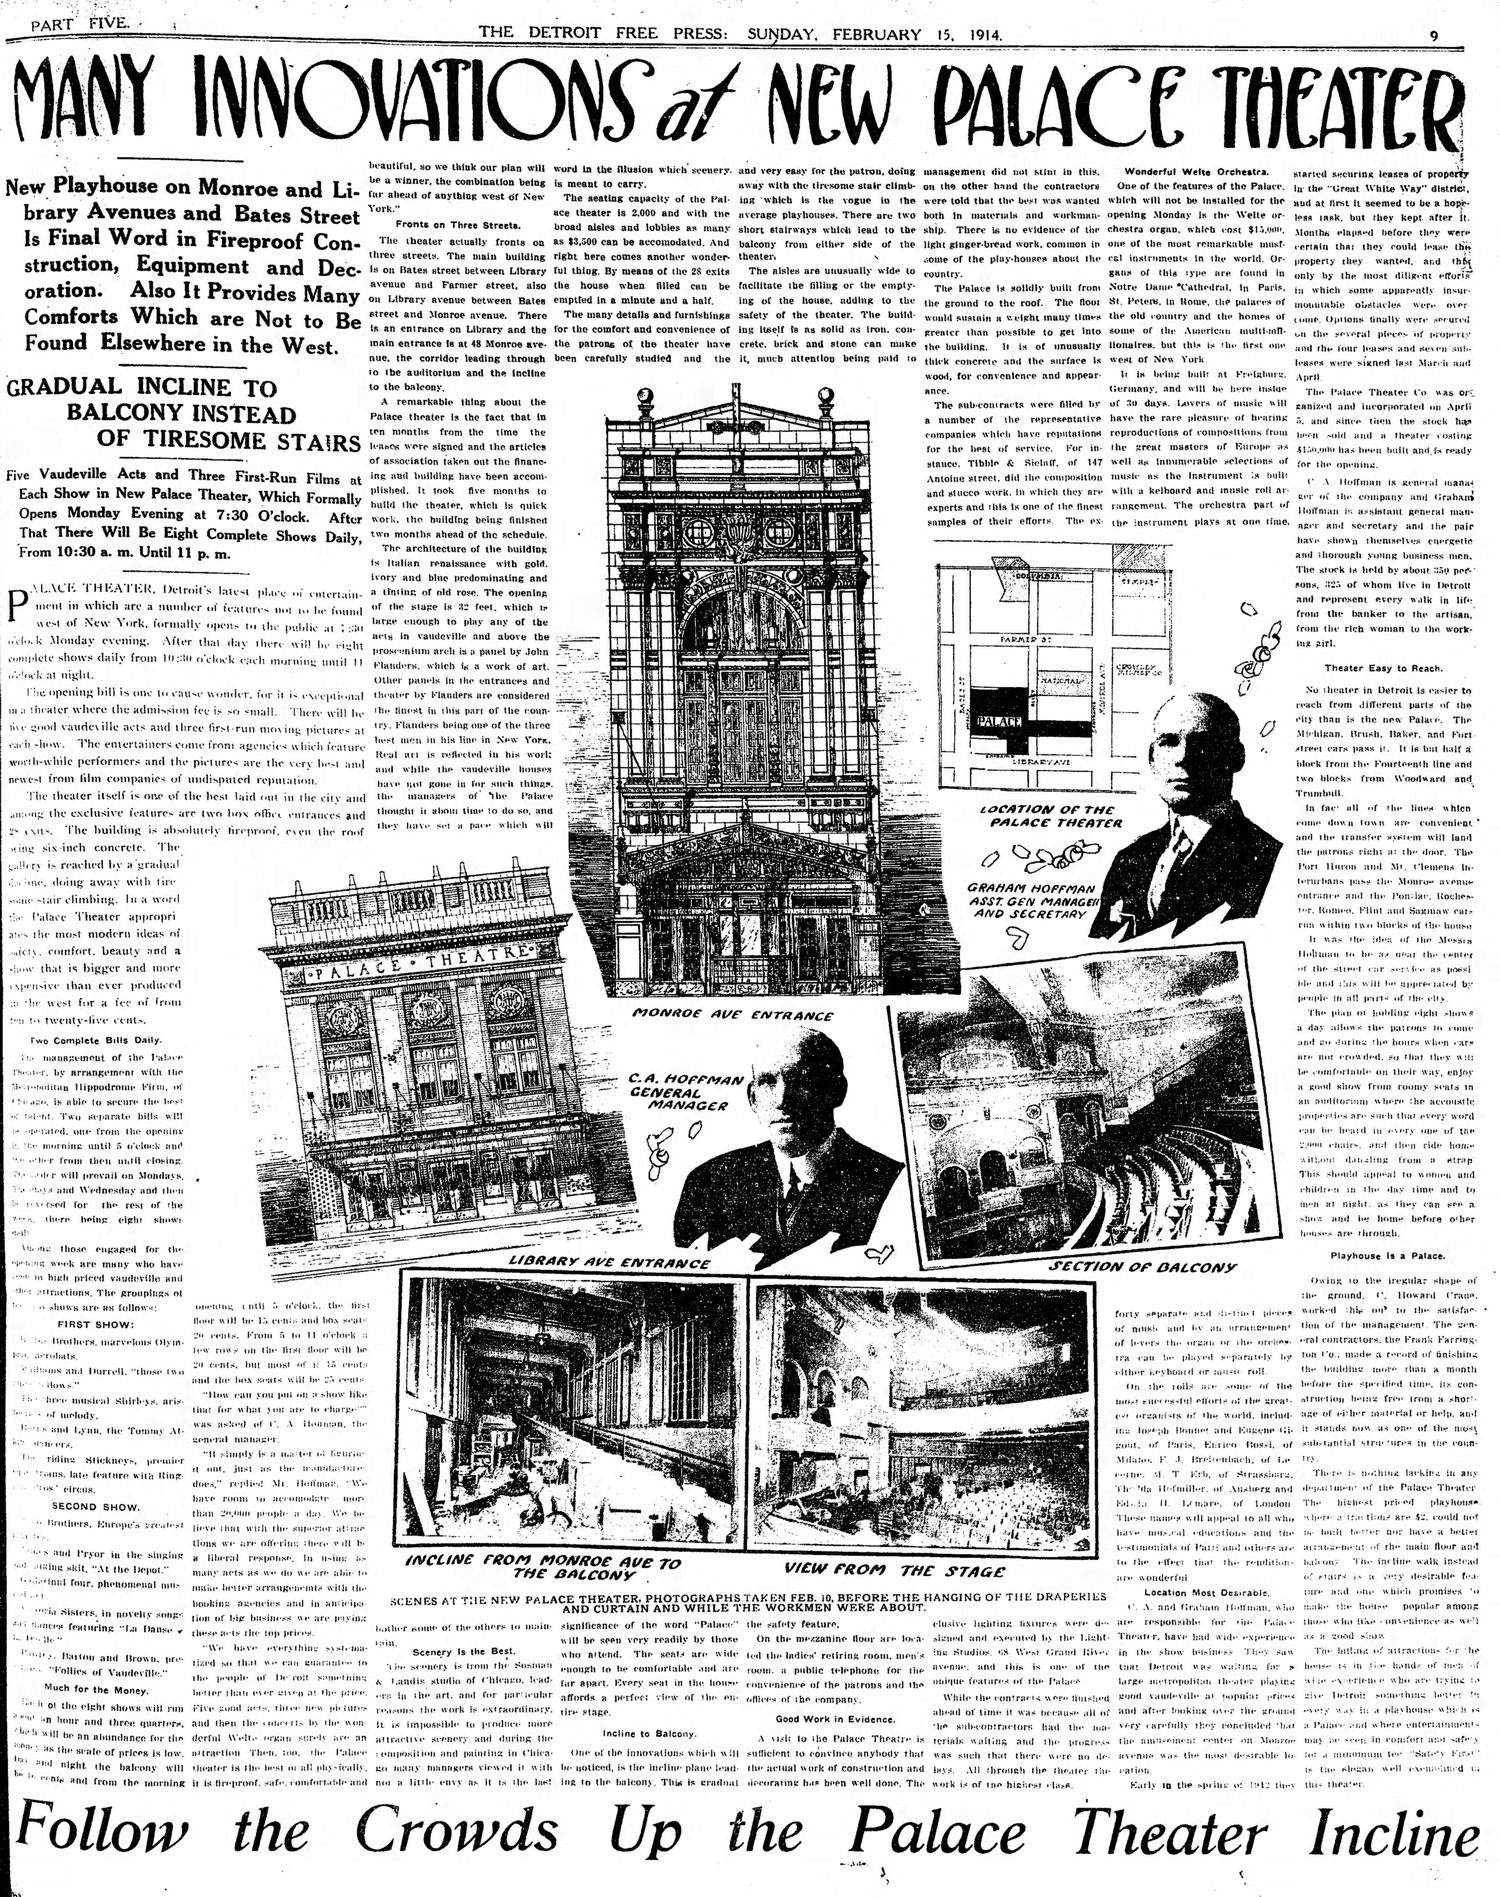 Palace Theatre (Alhambra Theater) - Feb 15 1914 Article